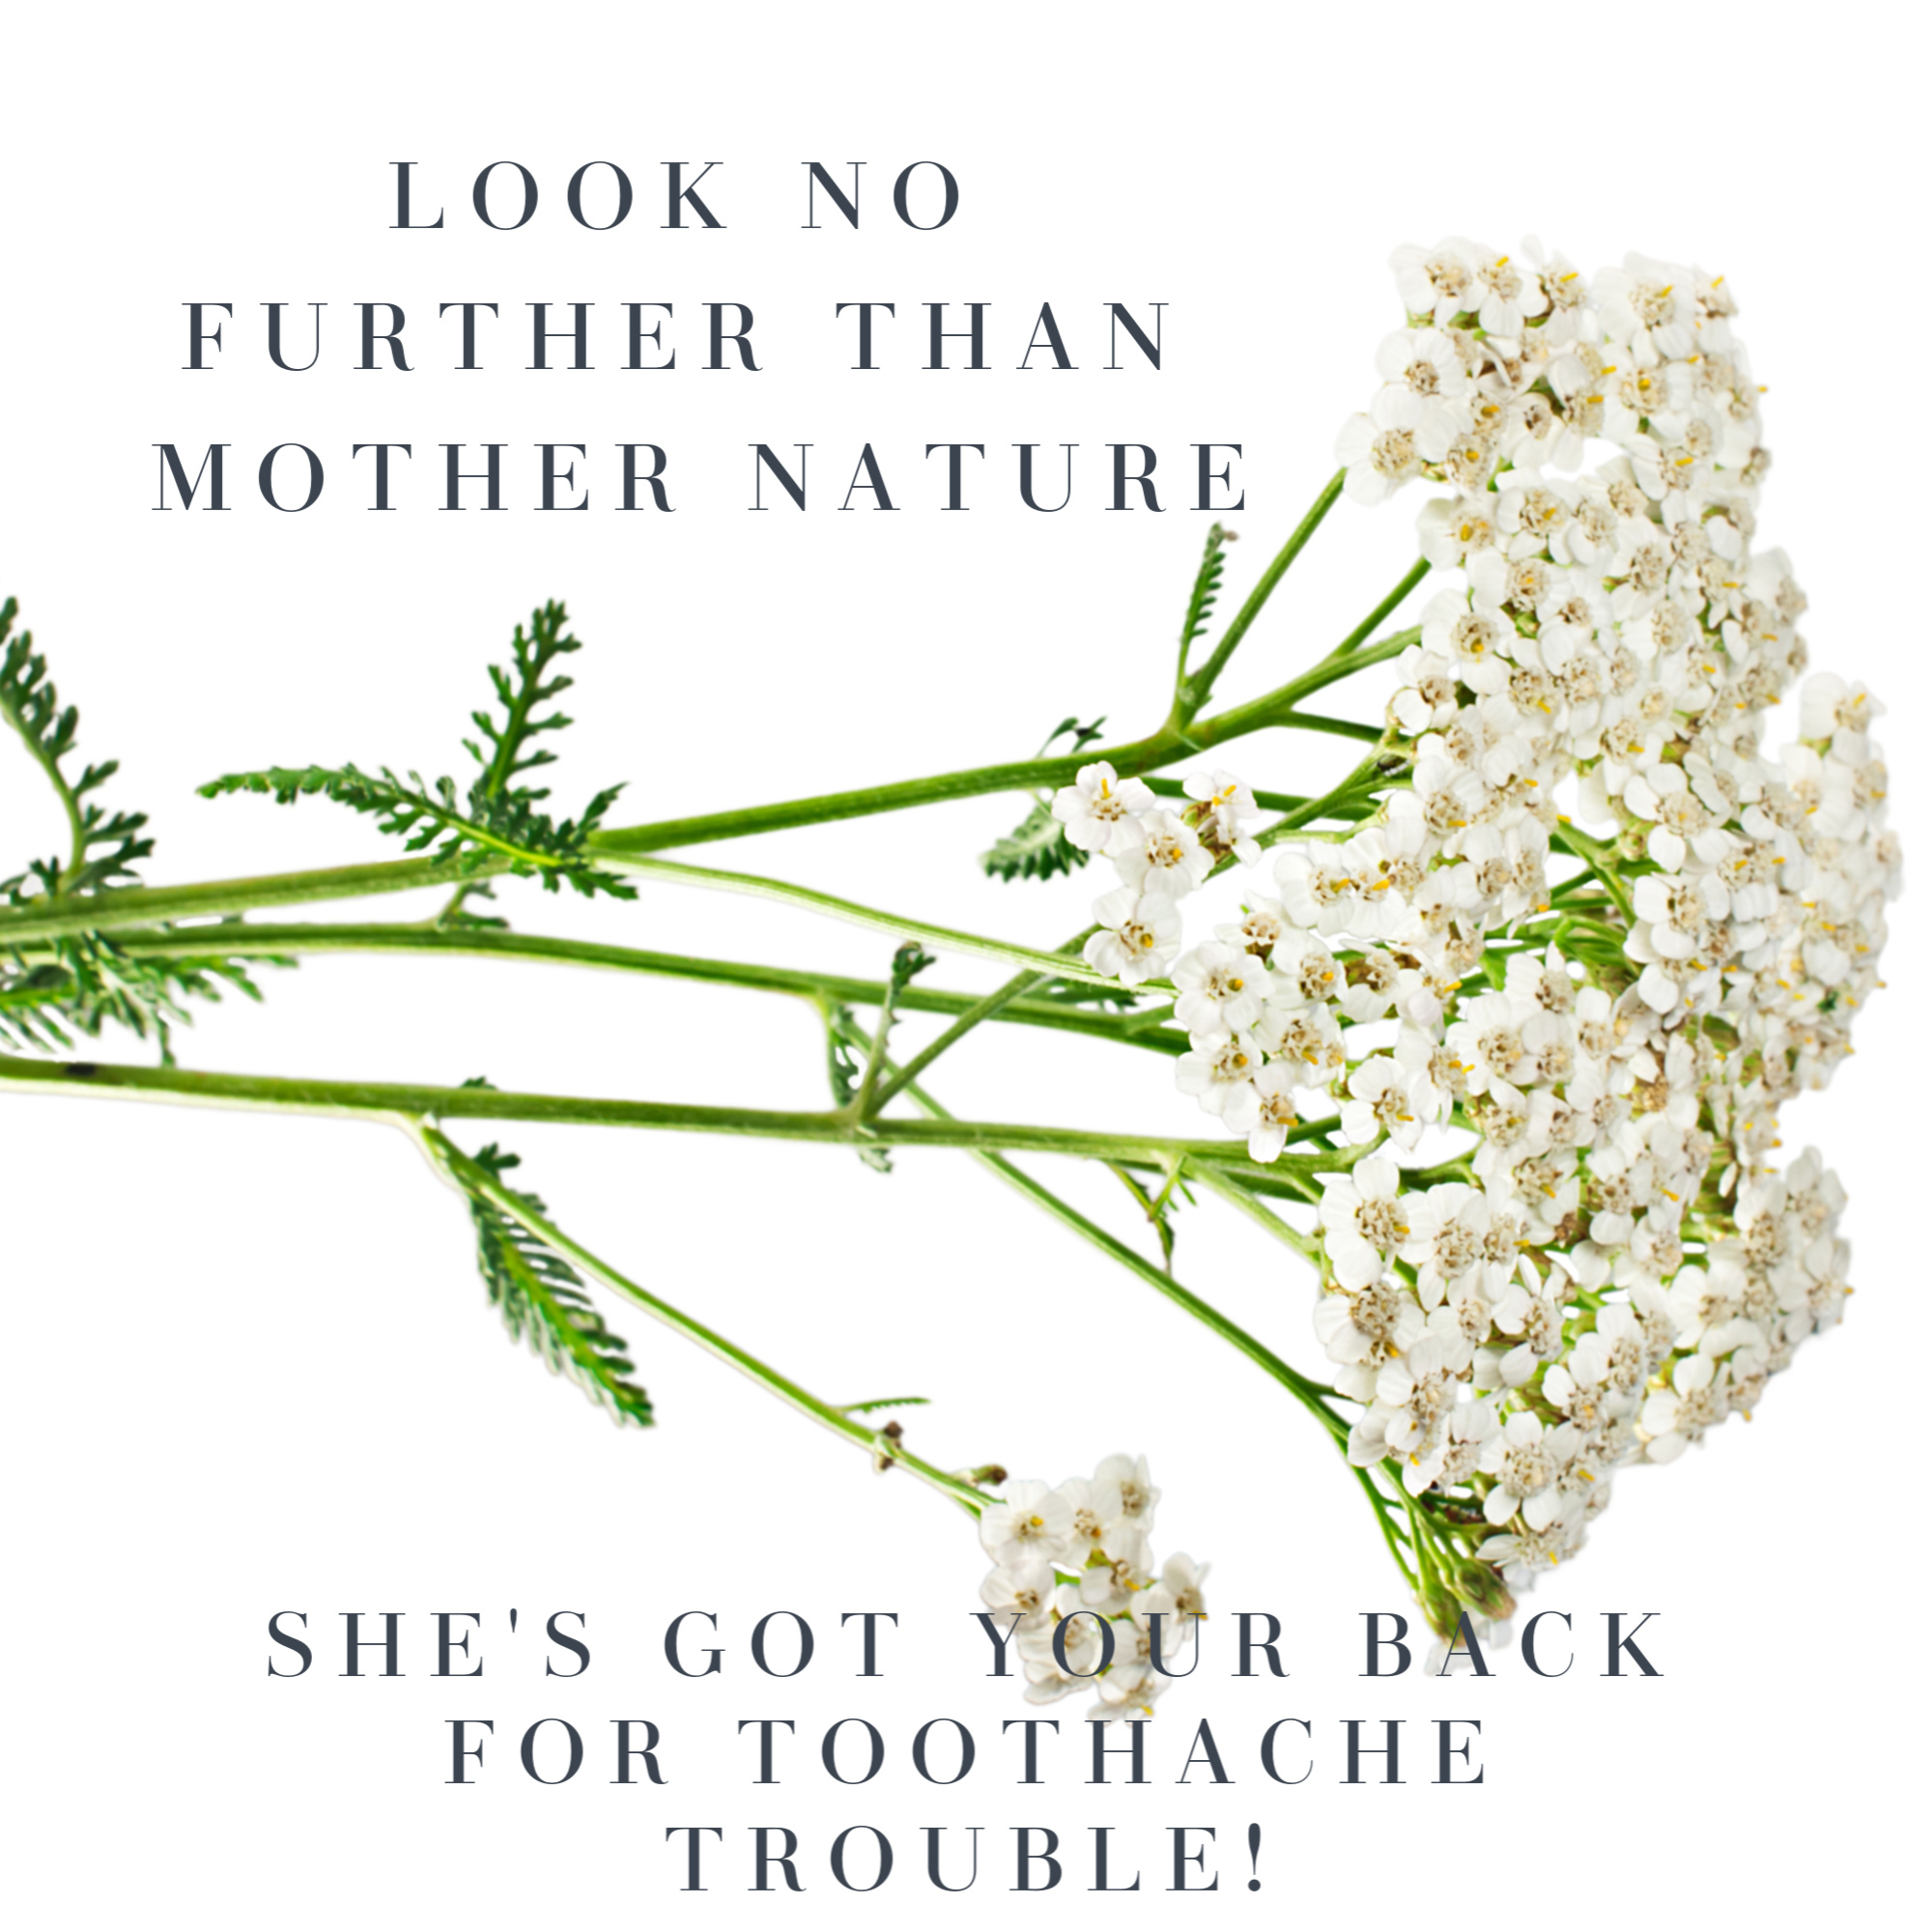 sprig of yarrow for natural toothache relief